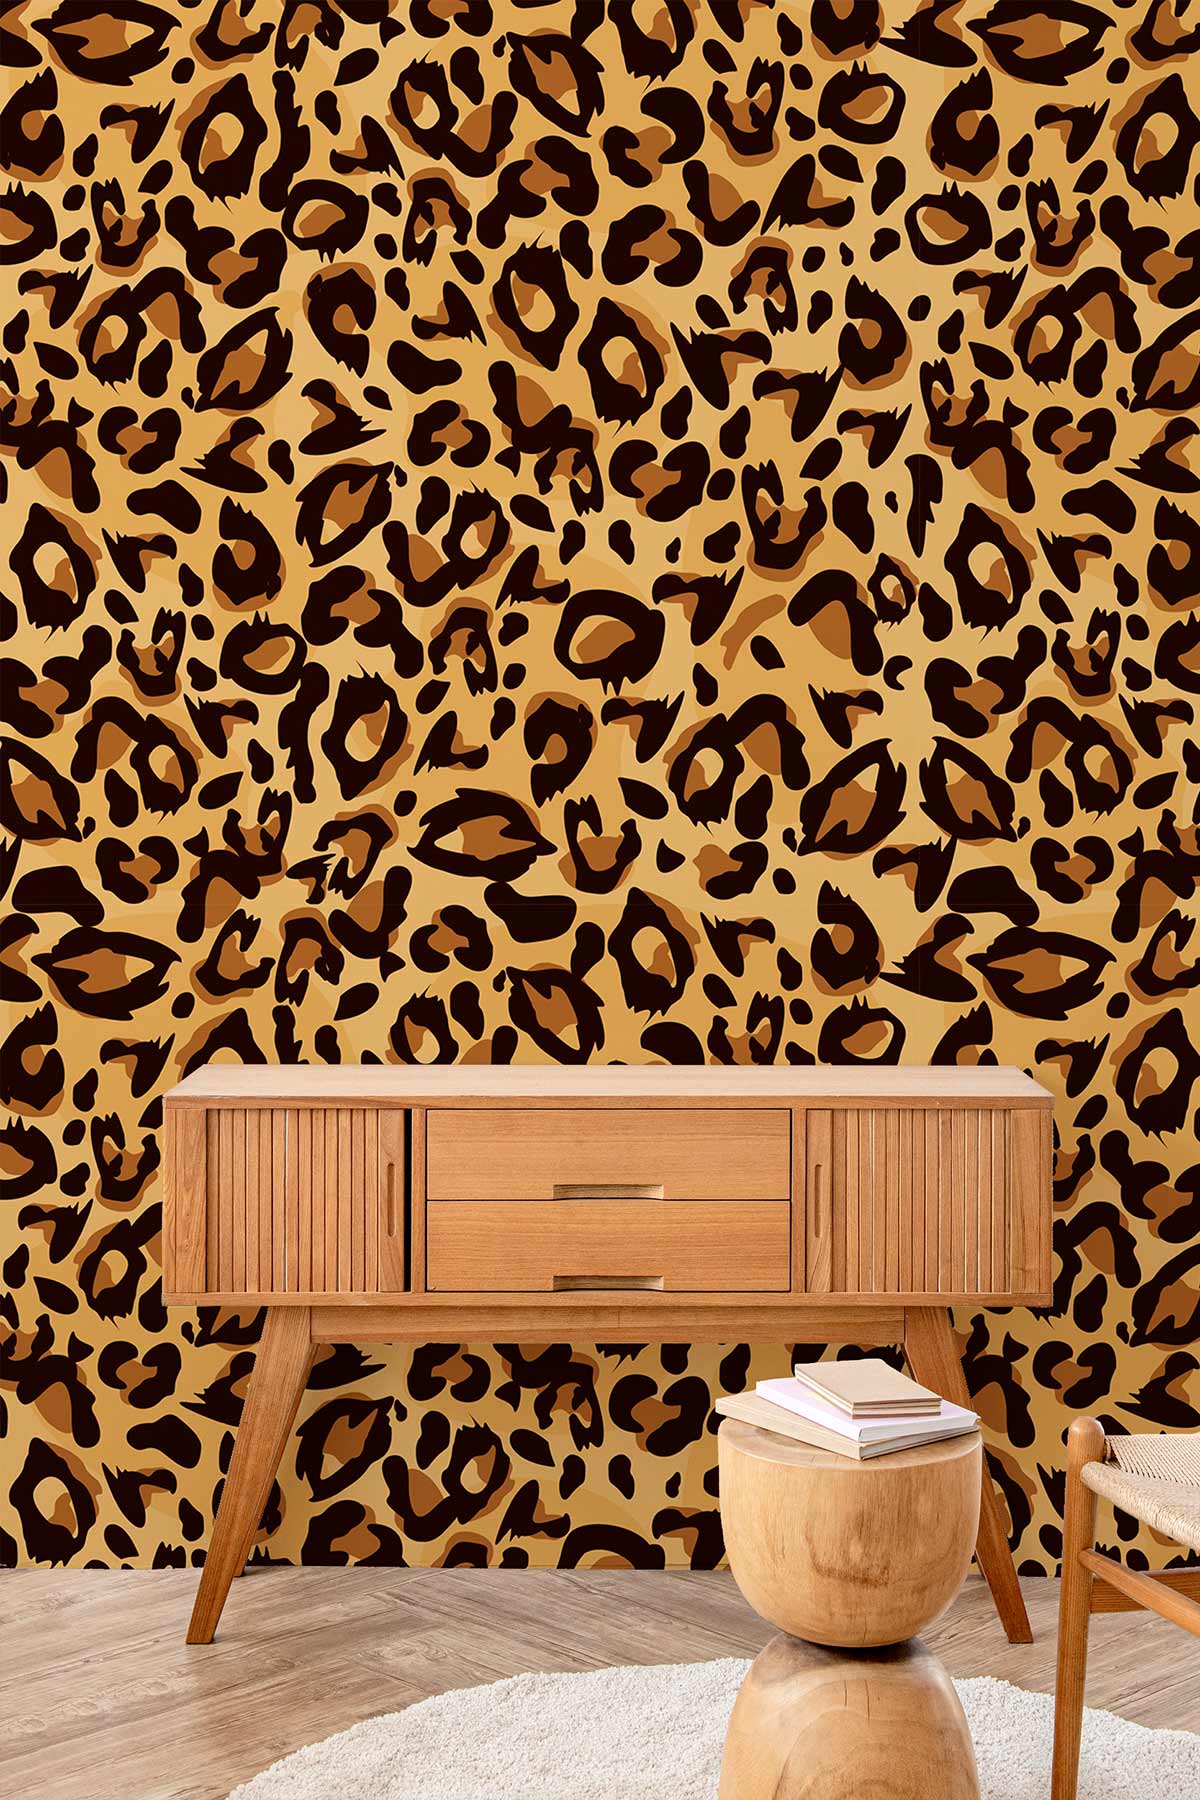 Leopard and fur wallpaper mural used for the interior decoration of hallways